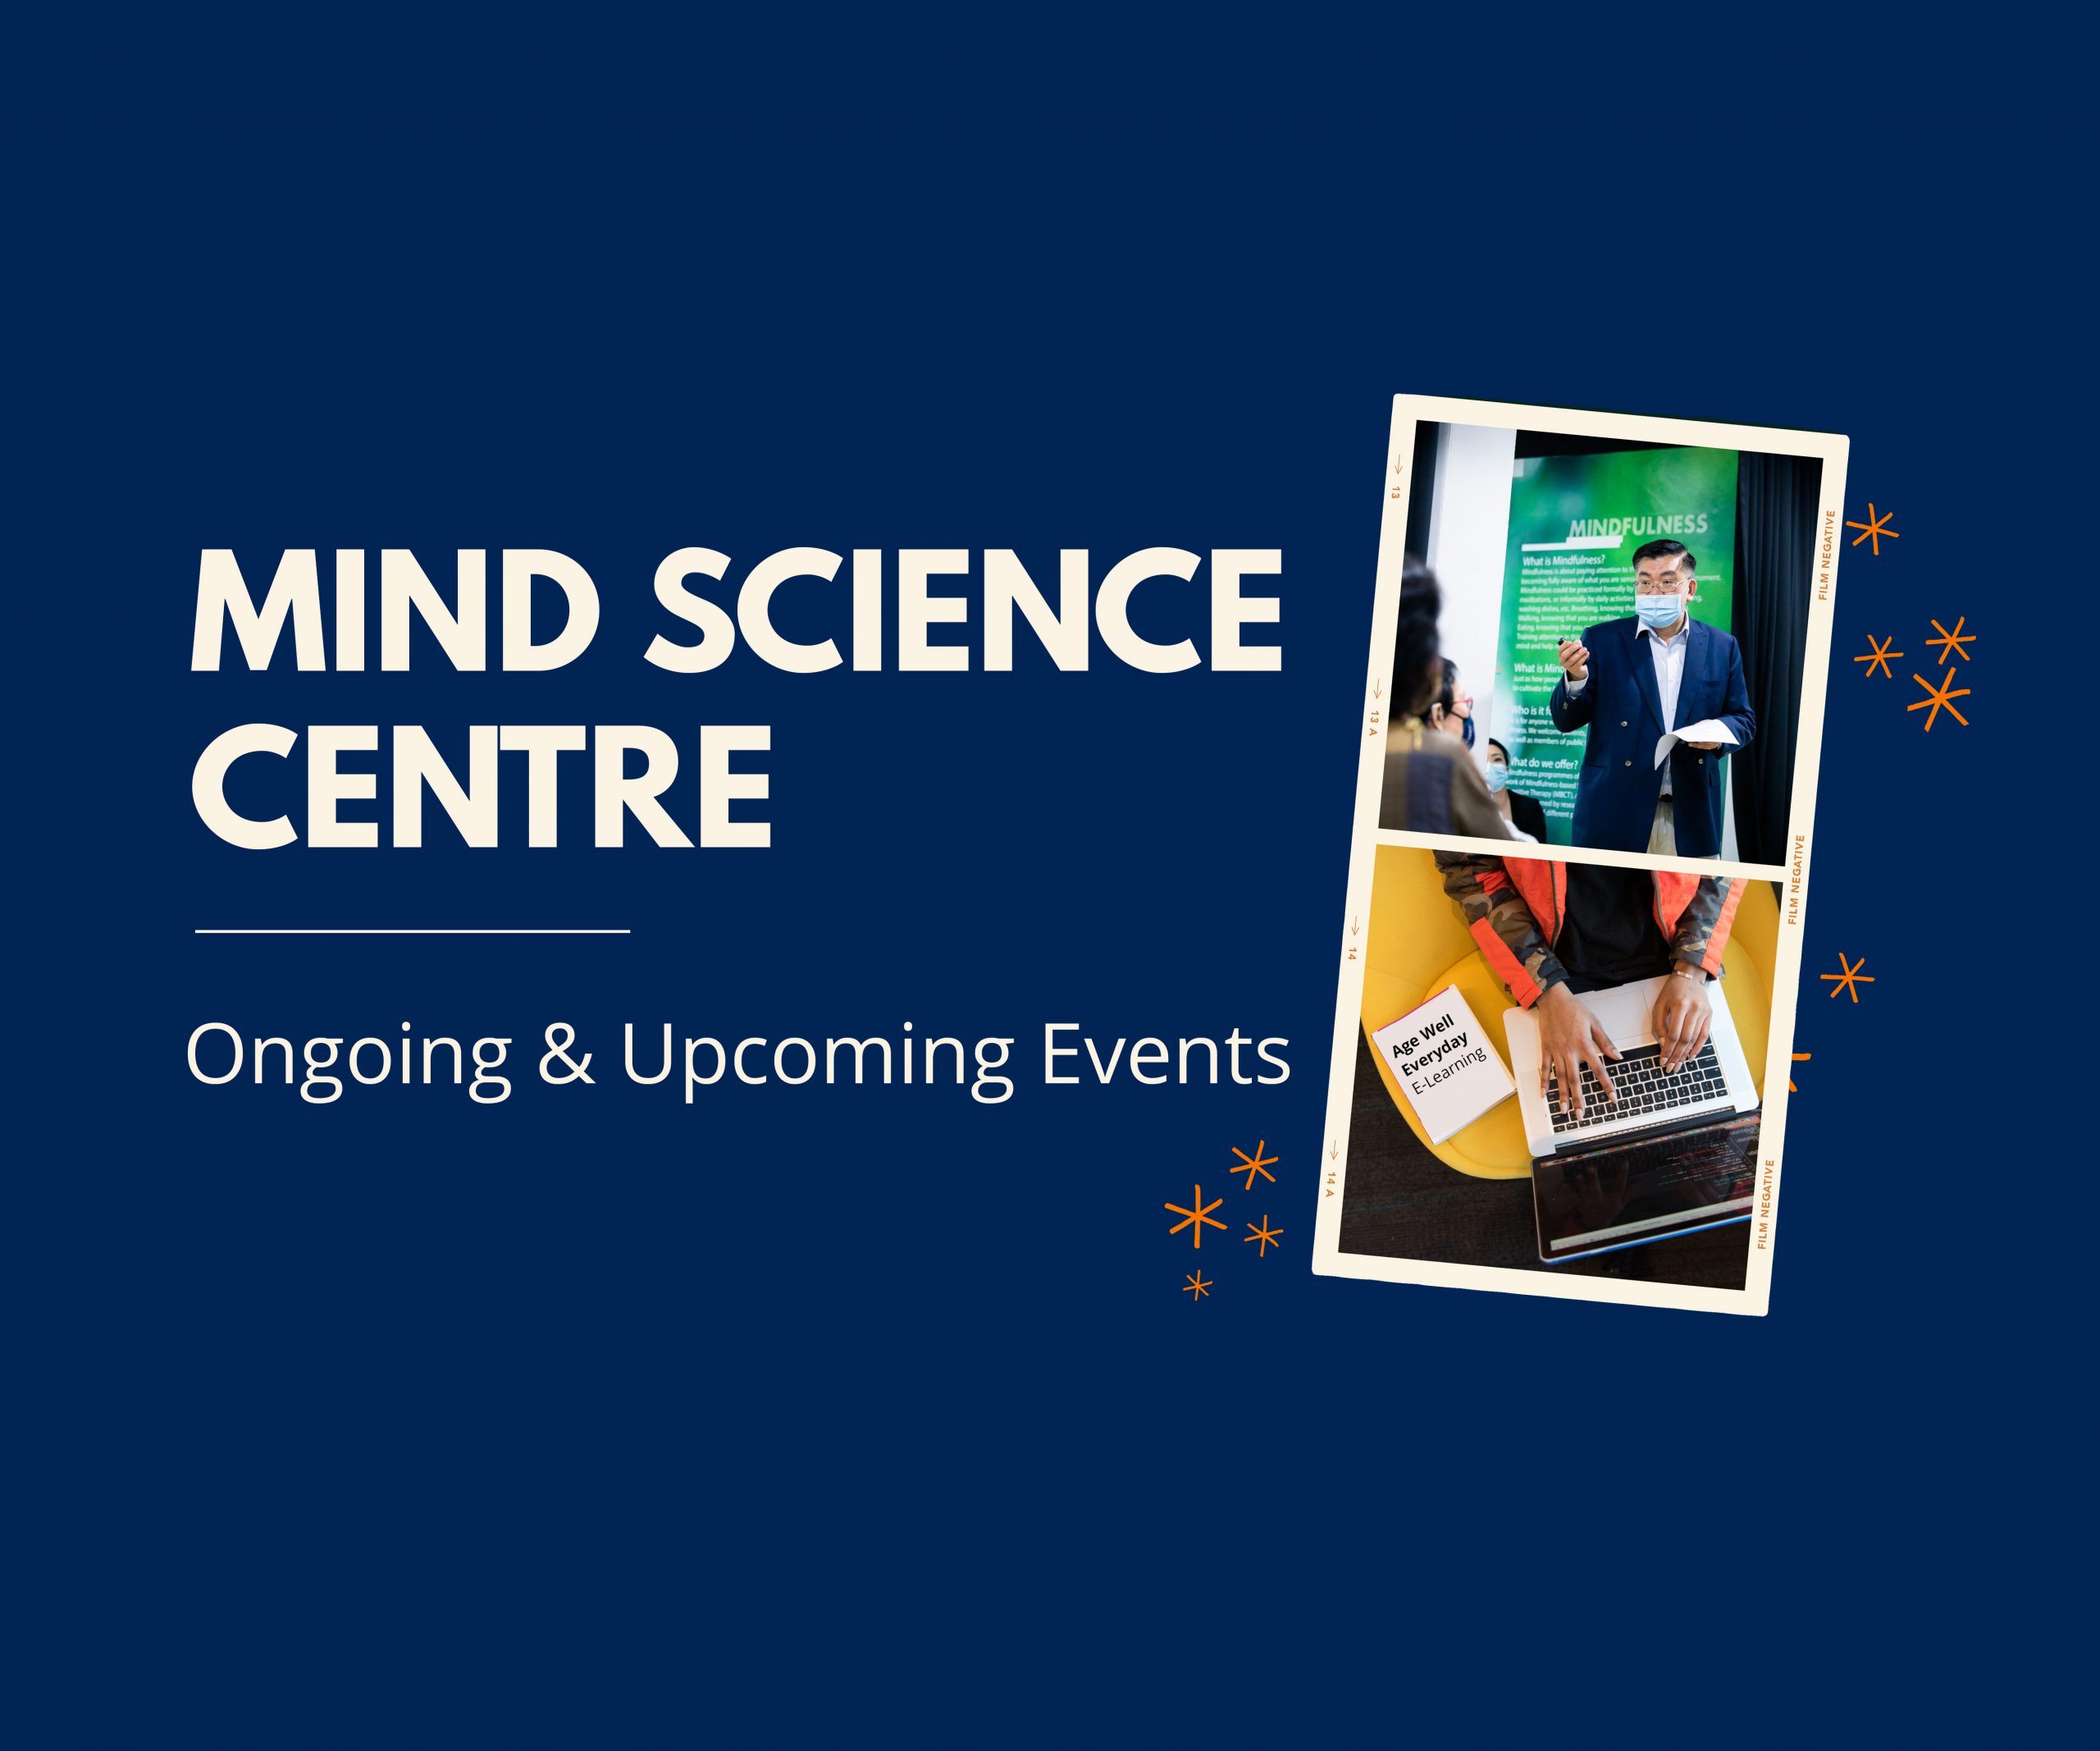 Mind Science Centre: Ongoing & Upcoming Events